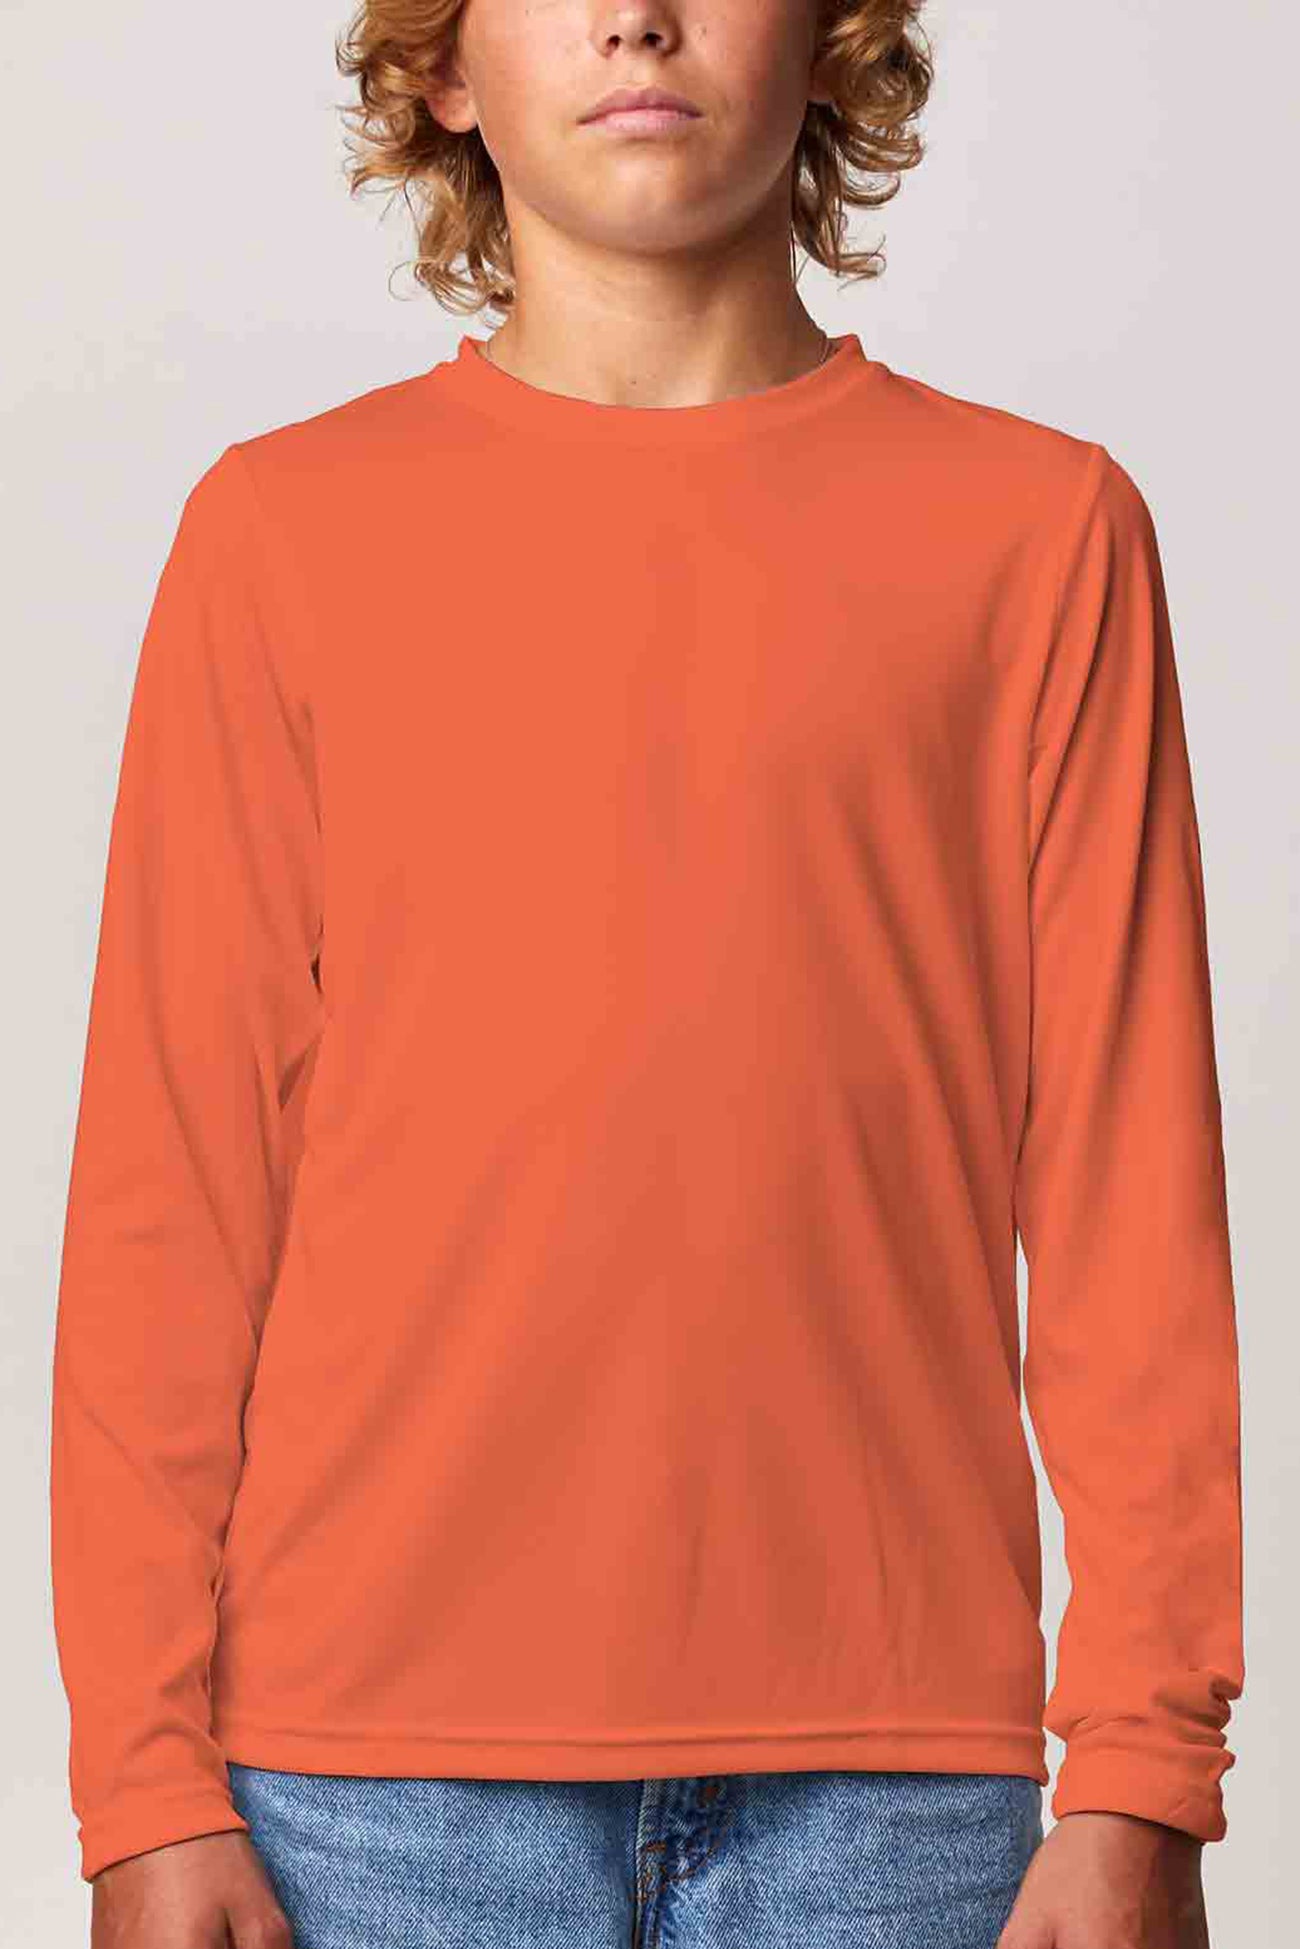 #SY3150LS Defender - Long Sleeve Crew - Youth